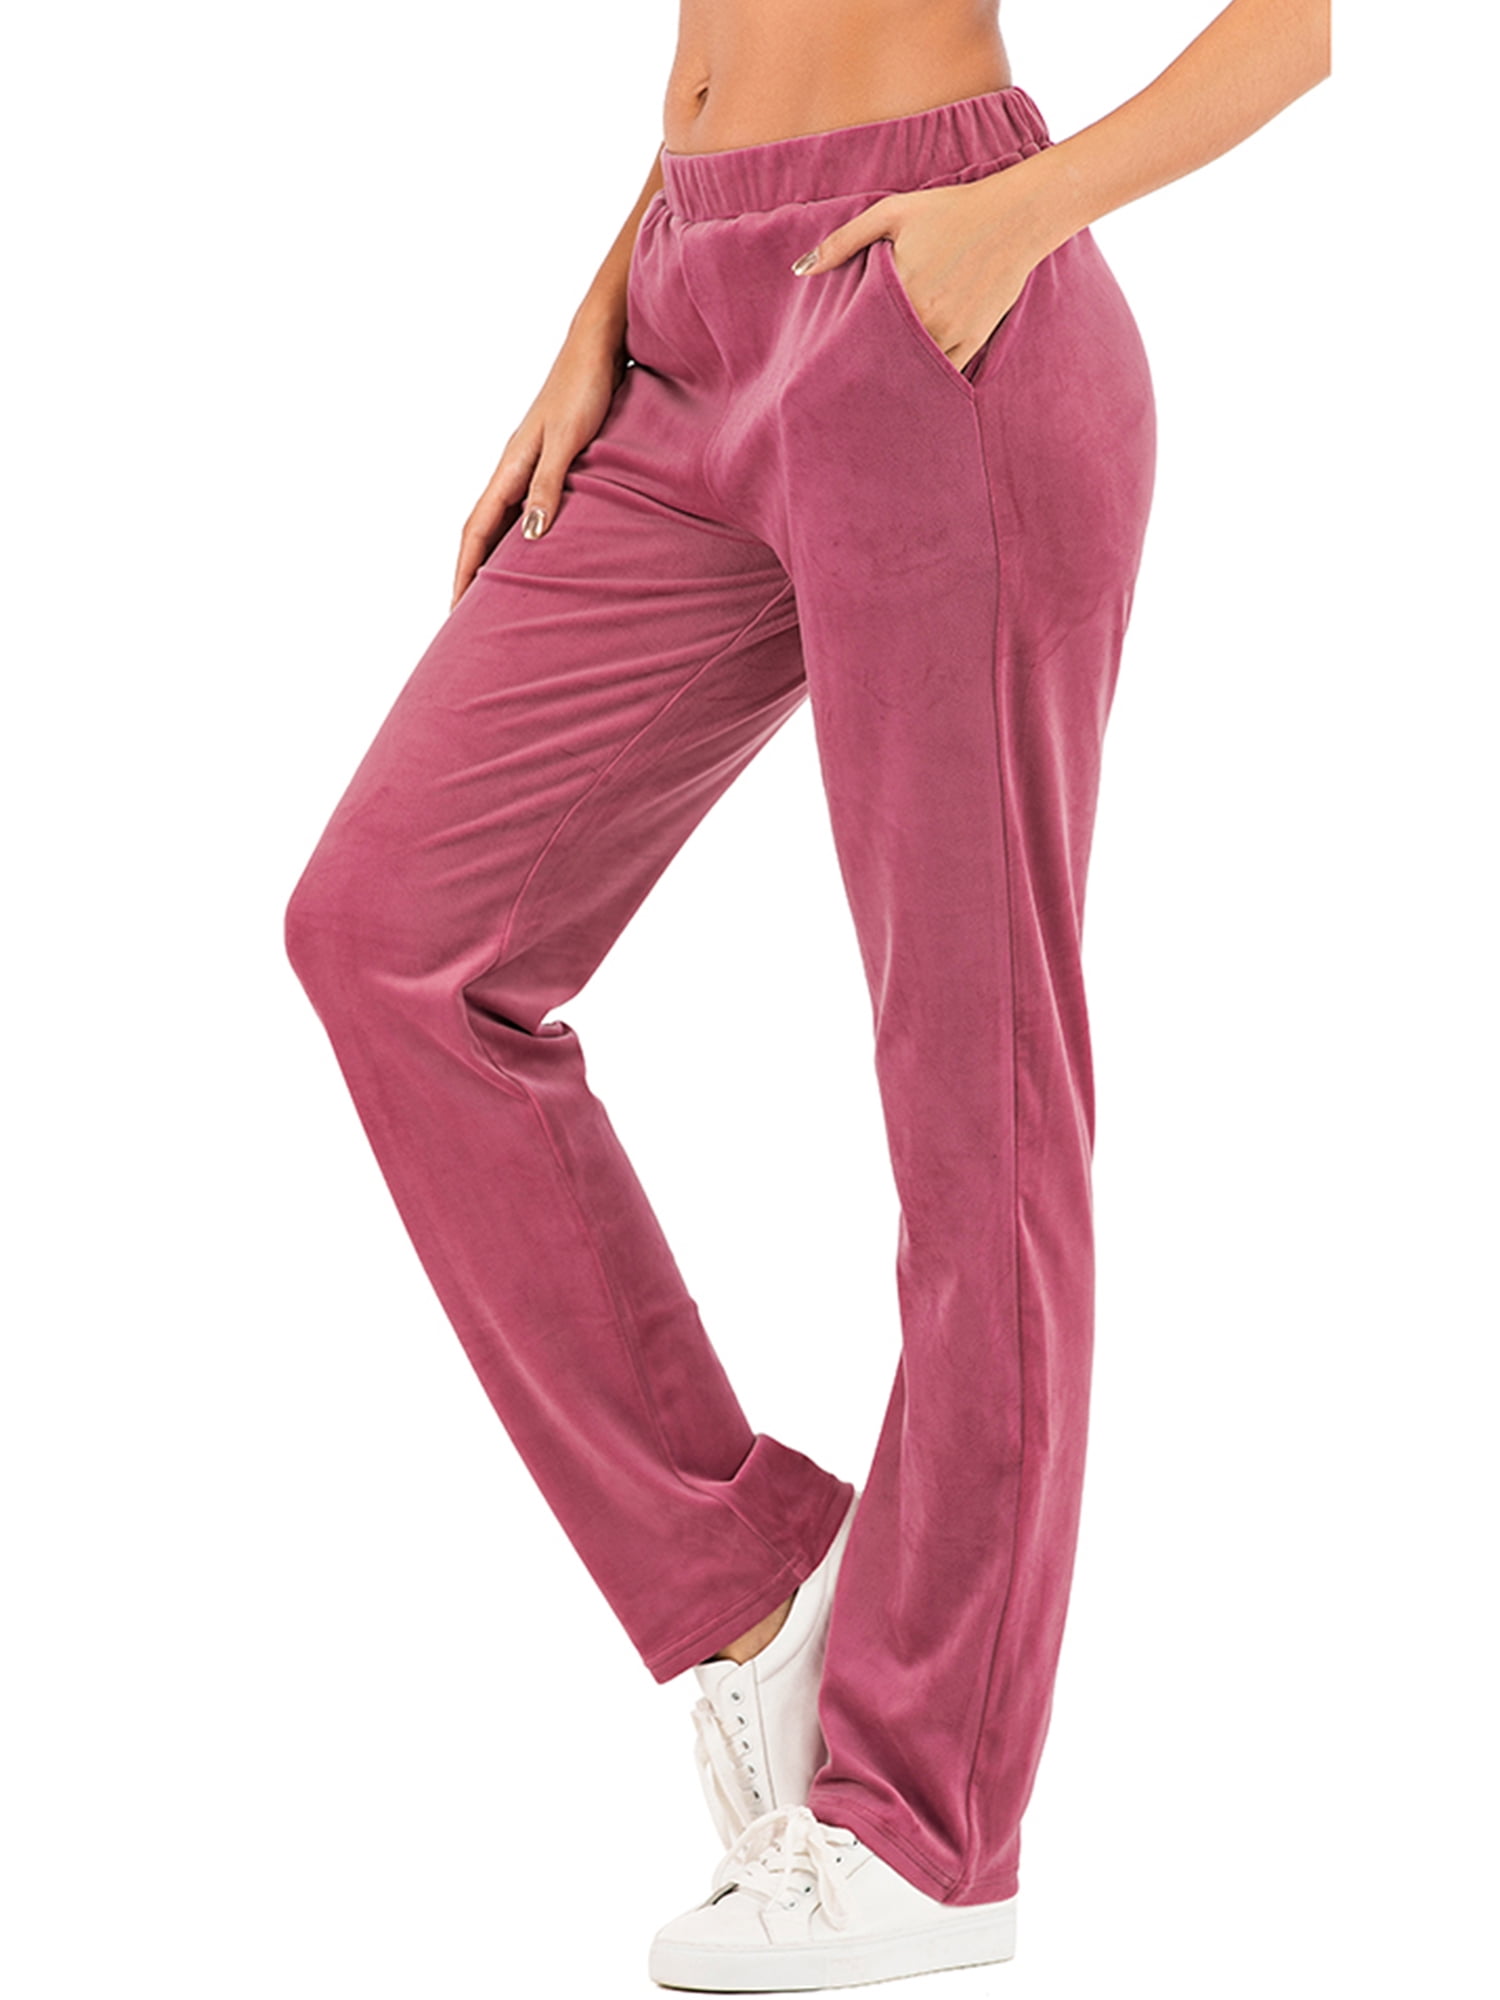 Details about   Hanes Women's Sport Performance Fleece Jogger Pants with Pockets 